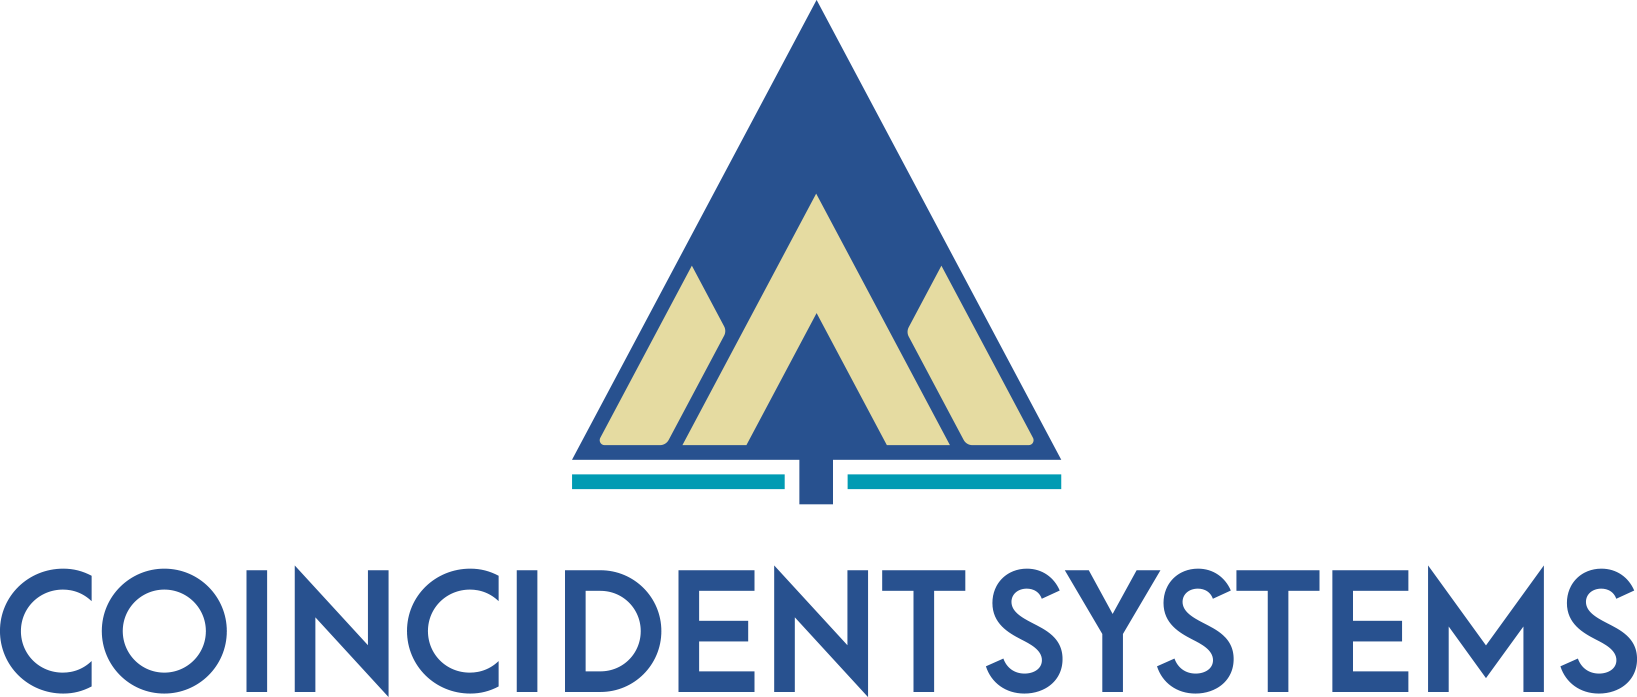 Coincident Systems Design and Development